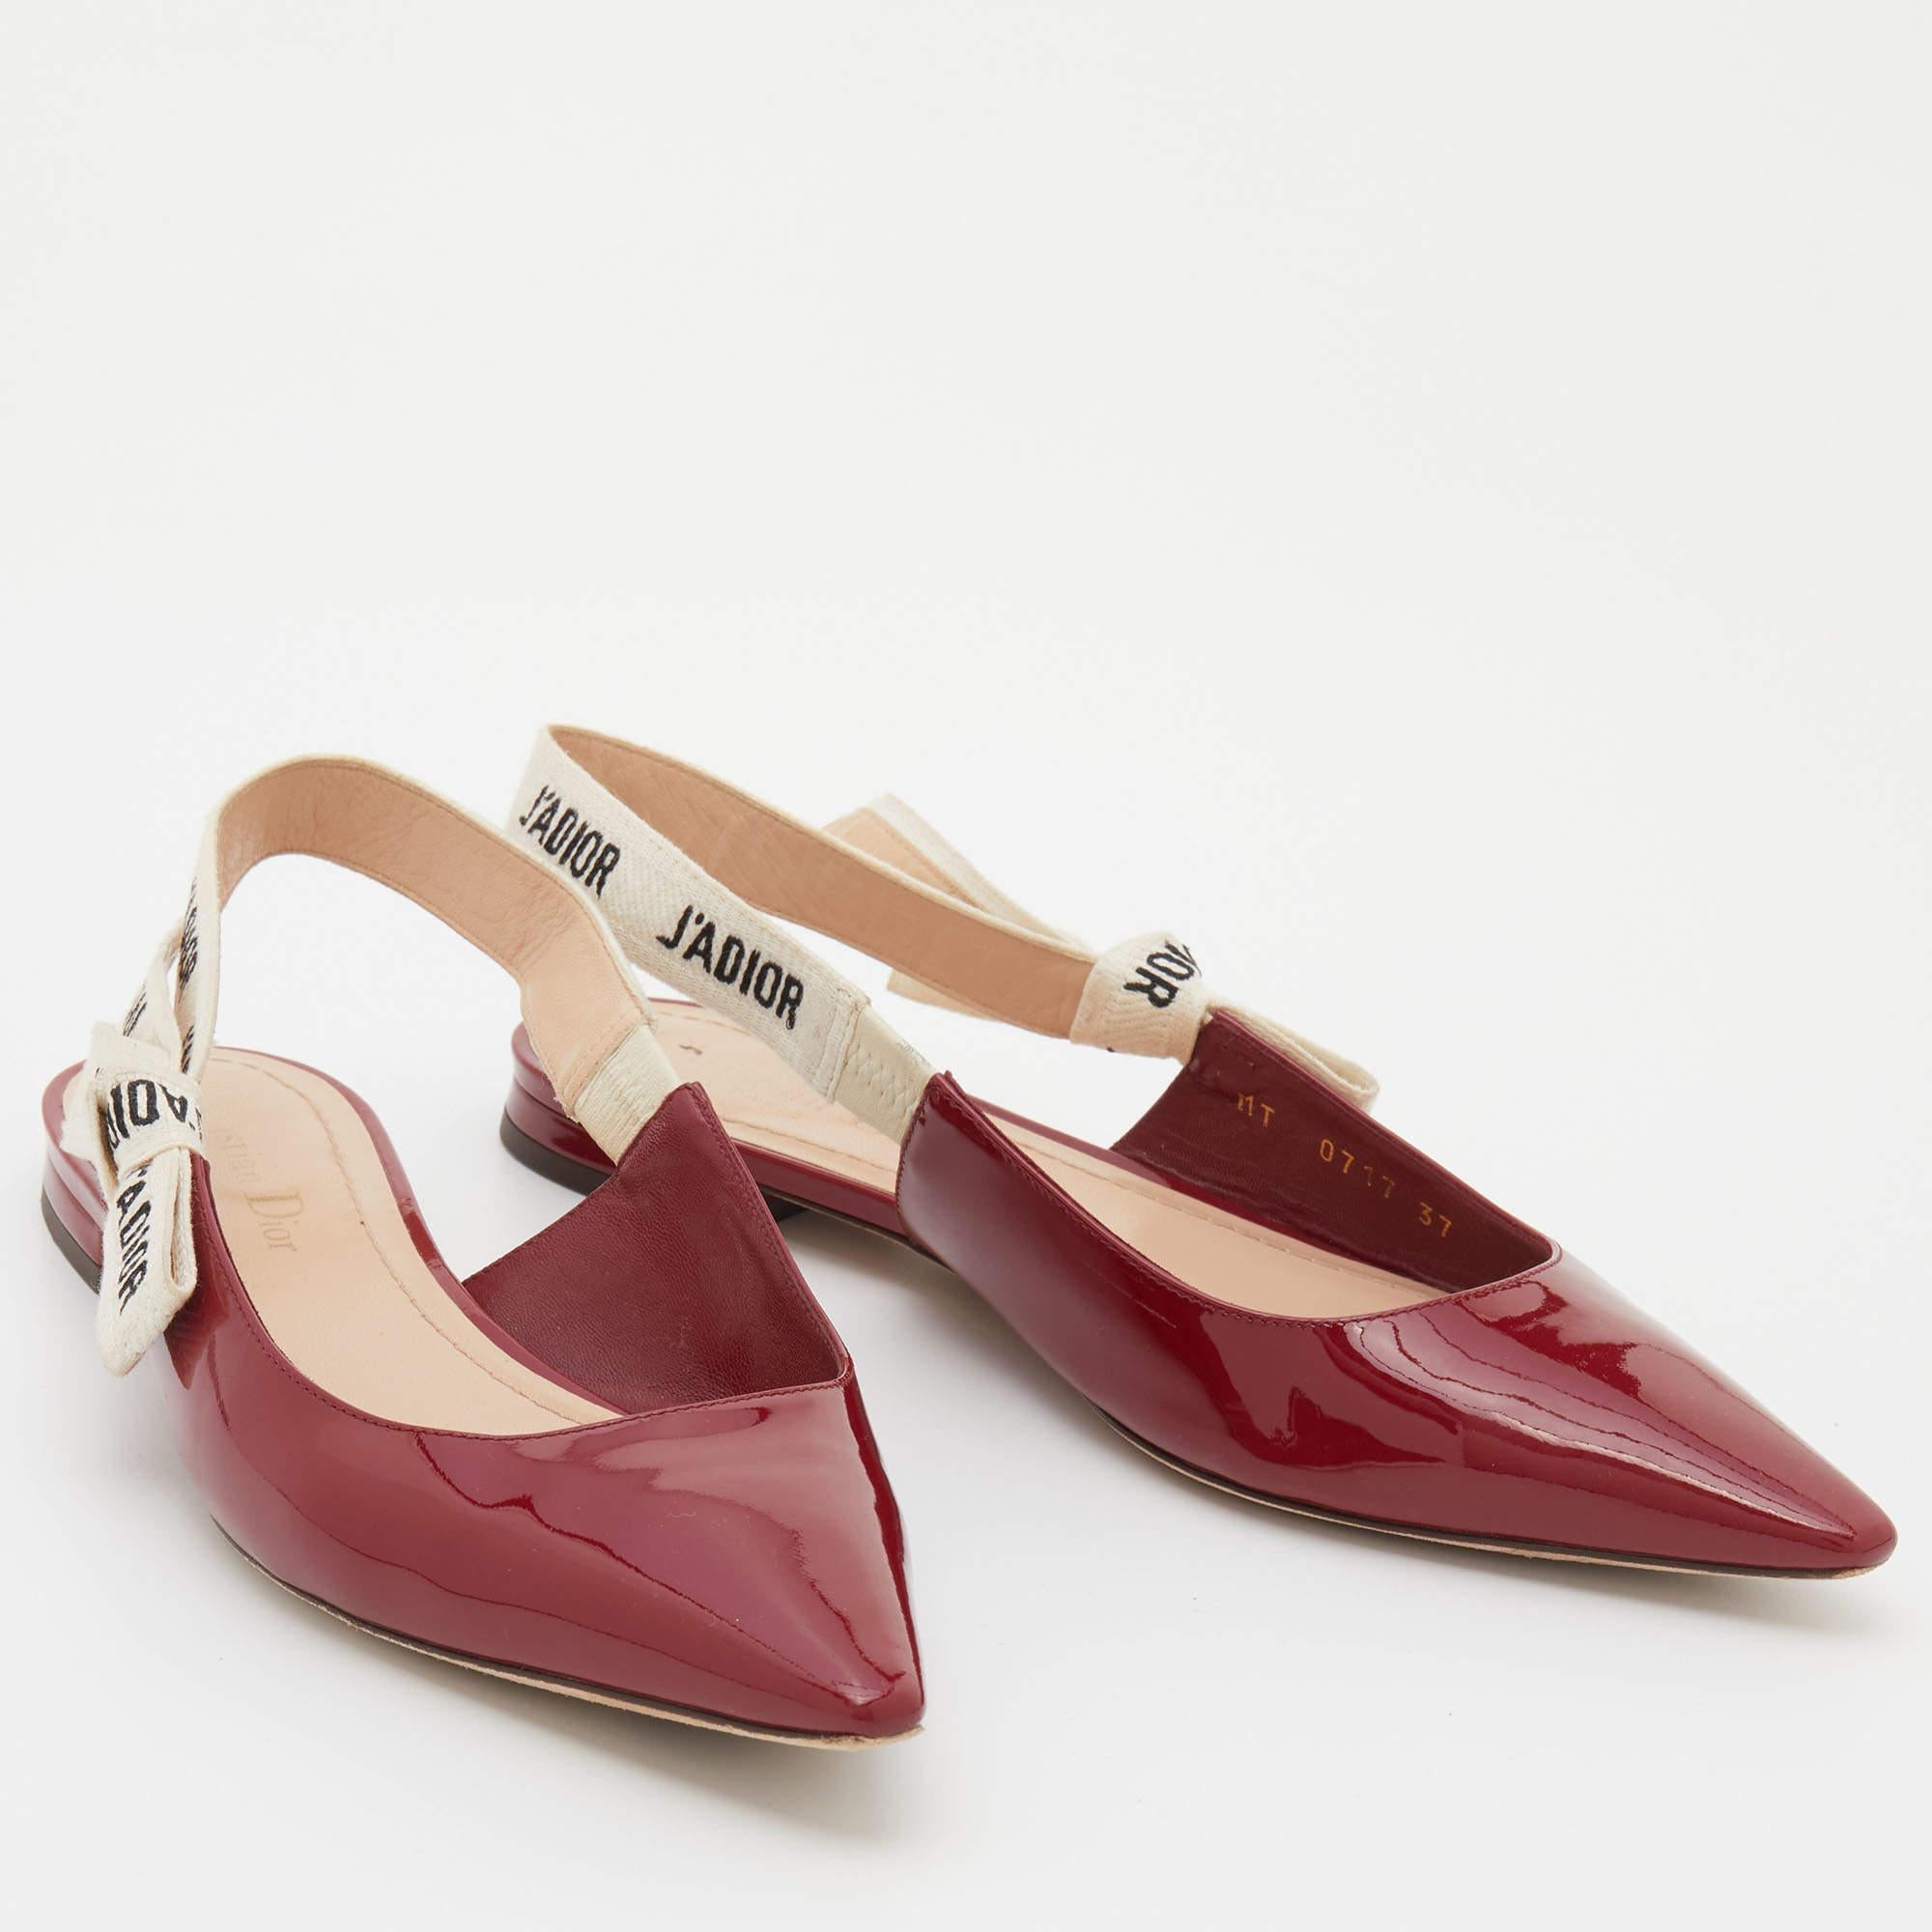 A perfect blend of luxury, style, and comfort, these designer flats are made using quality materials and frame your feet in the most elegant way. They can be paired with a host of outfits from your wardrobe.

Includes: Original Dustbag